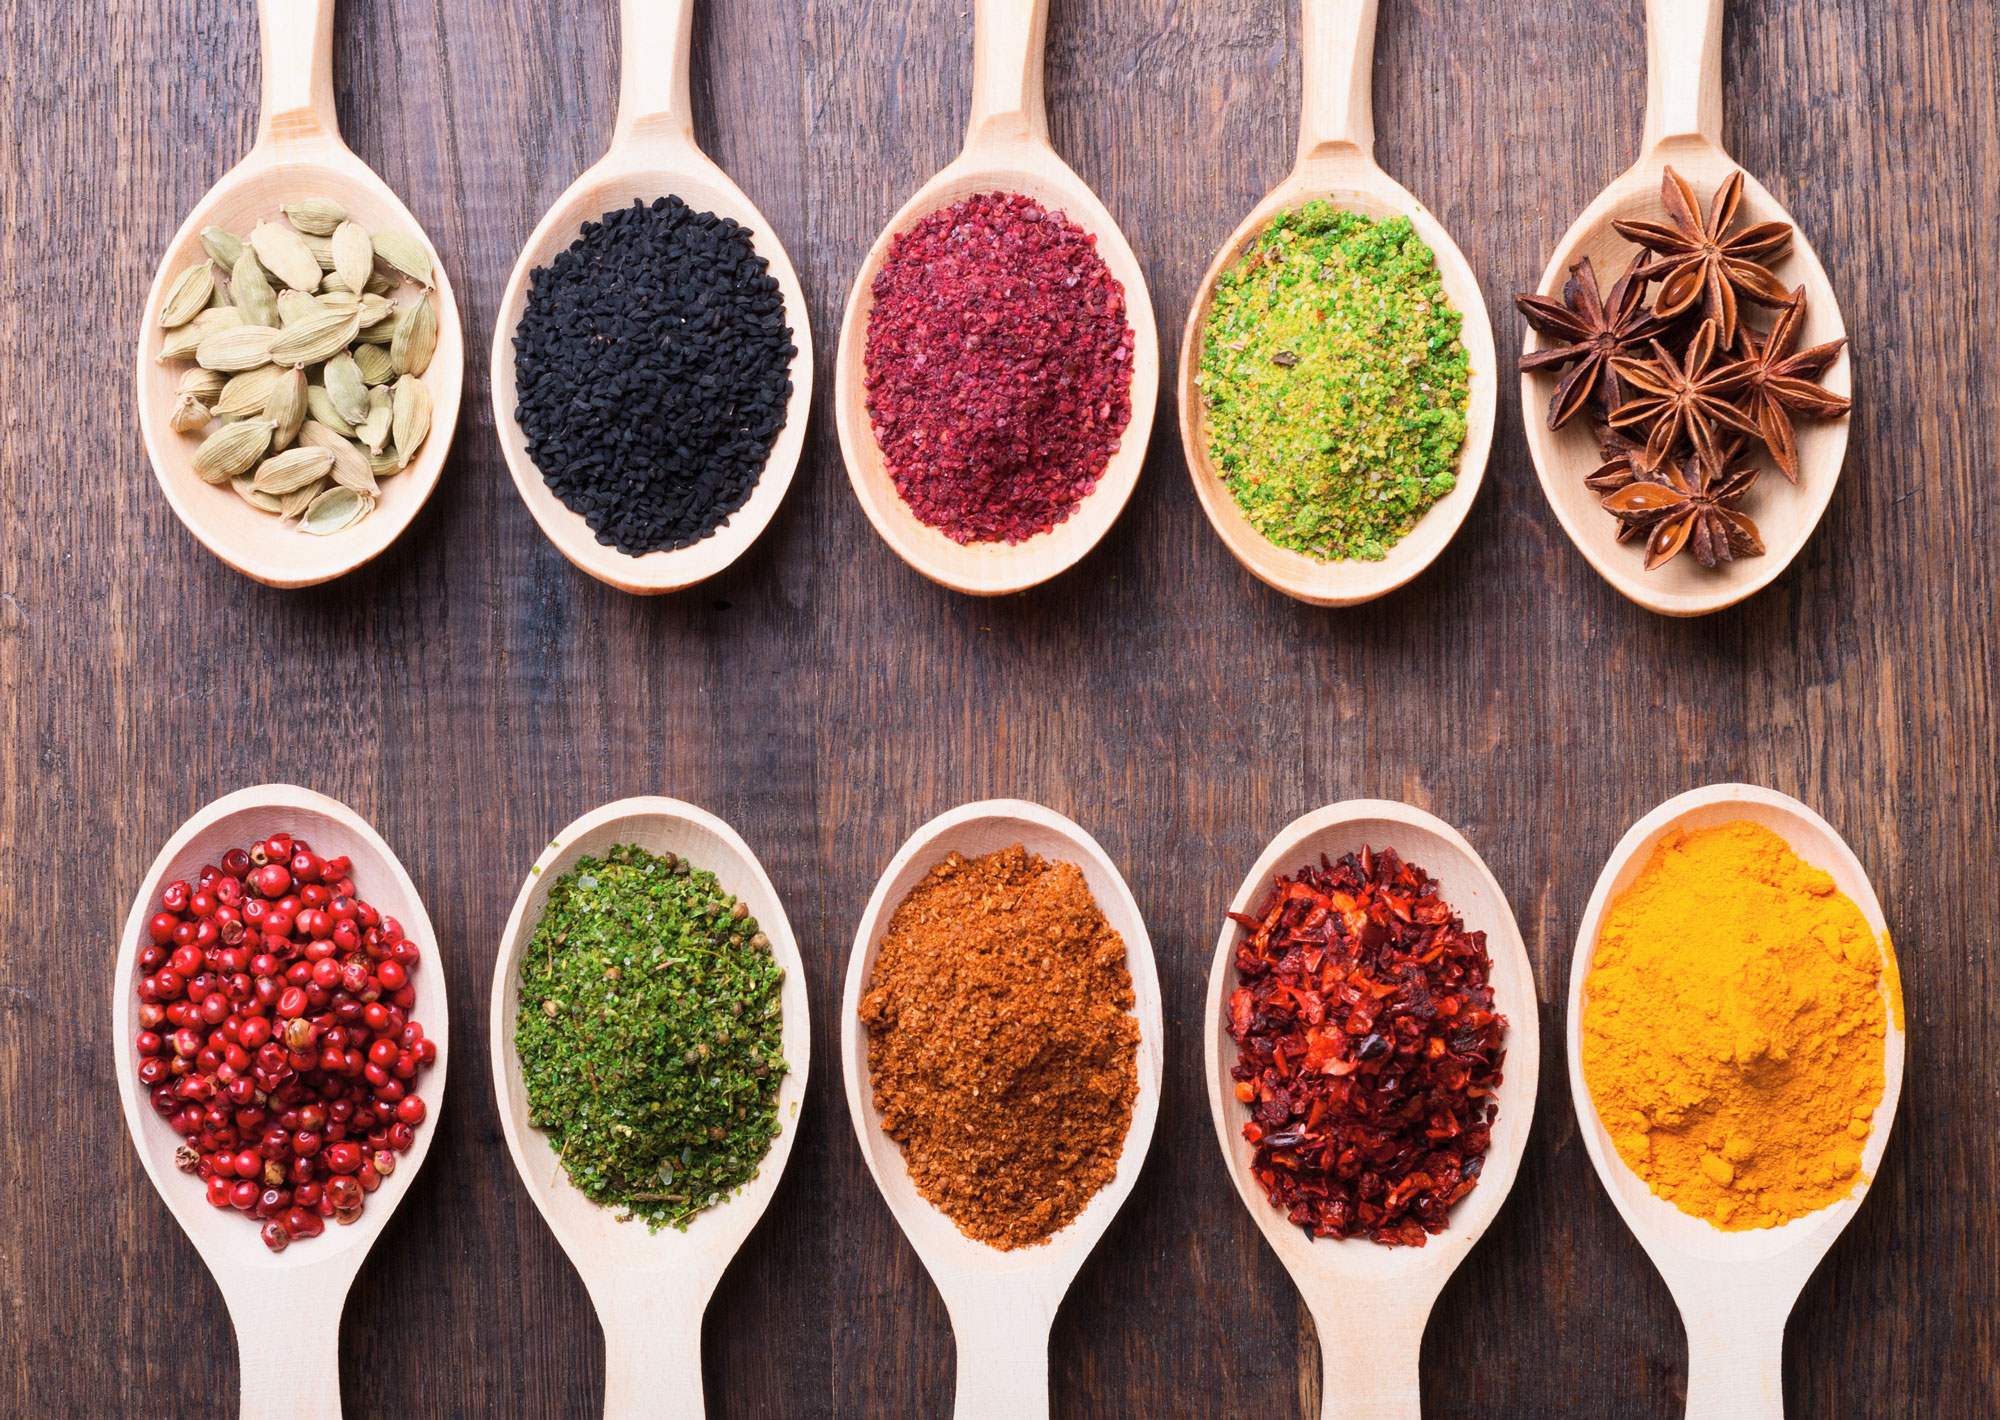 6 Healthy Spices that Make Your Food More Flavorful